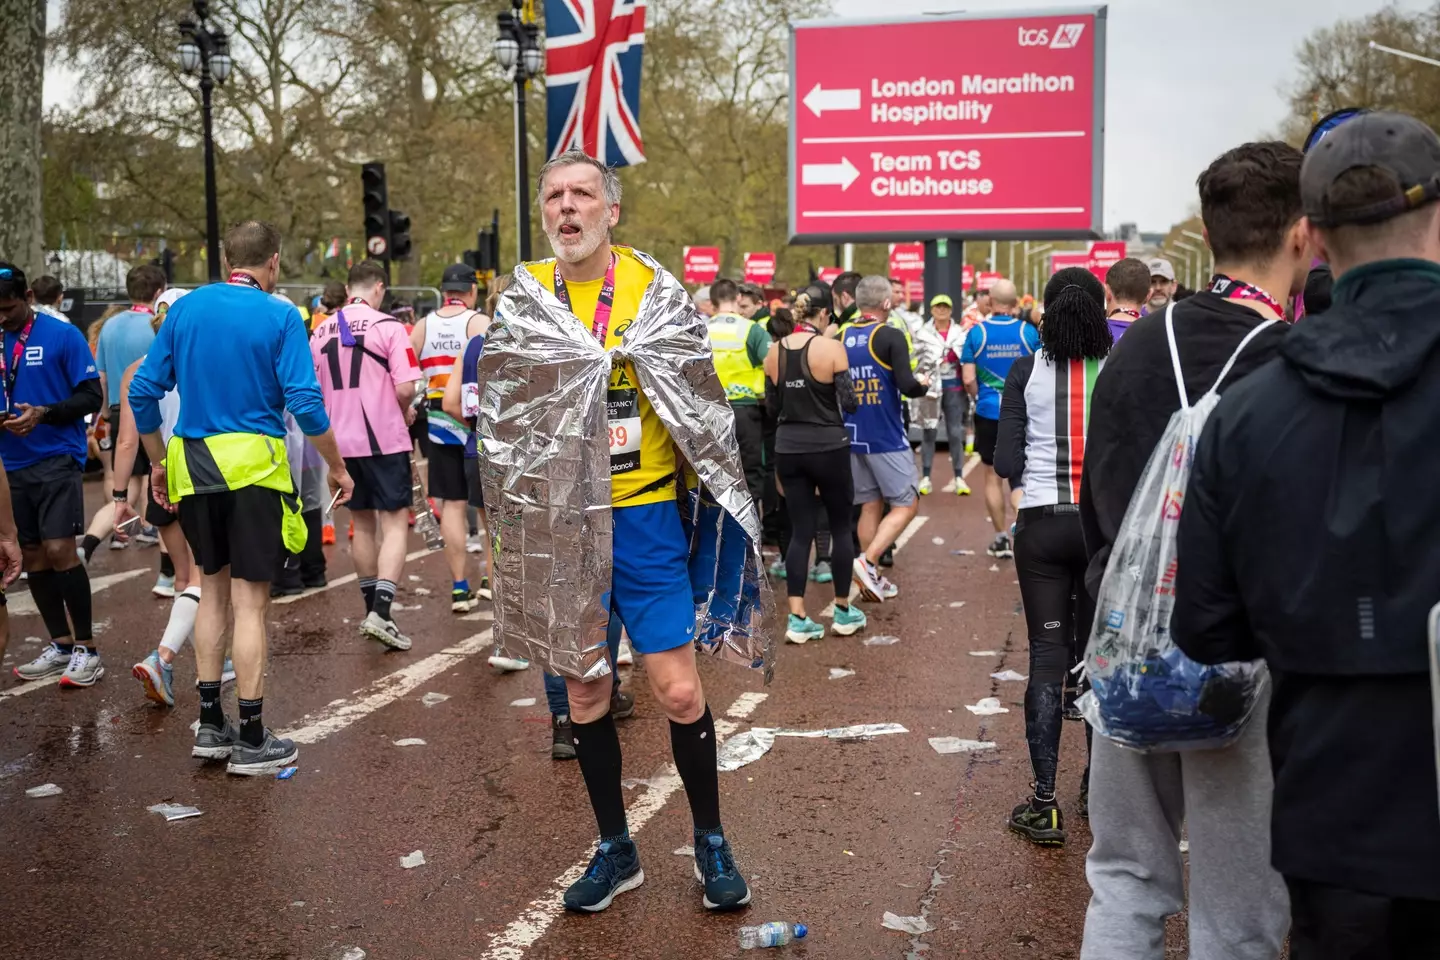 Thousands of people took part in this year's London Marathon.